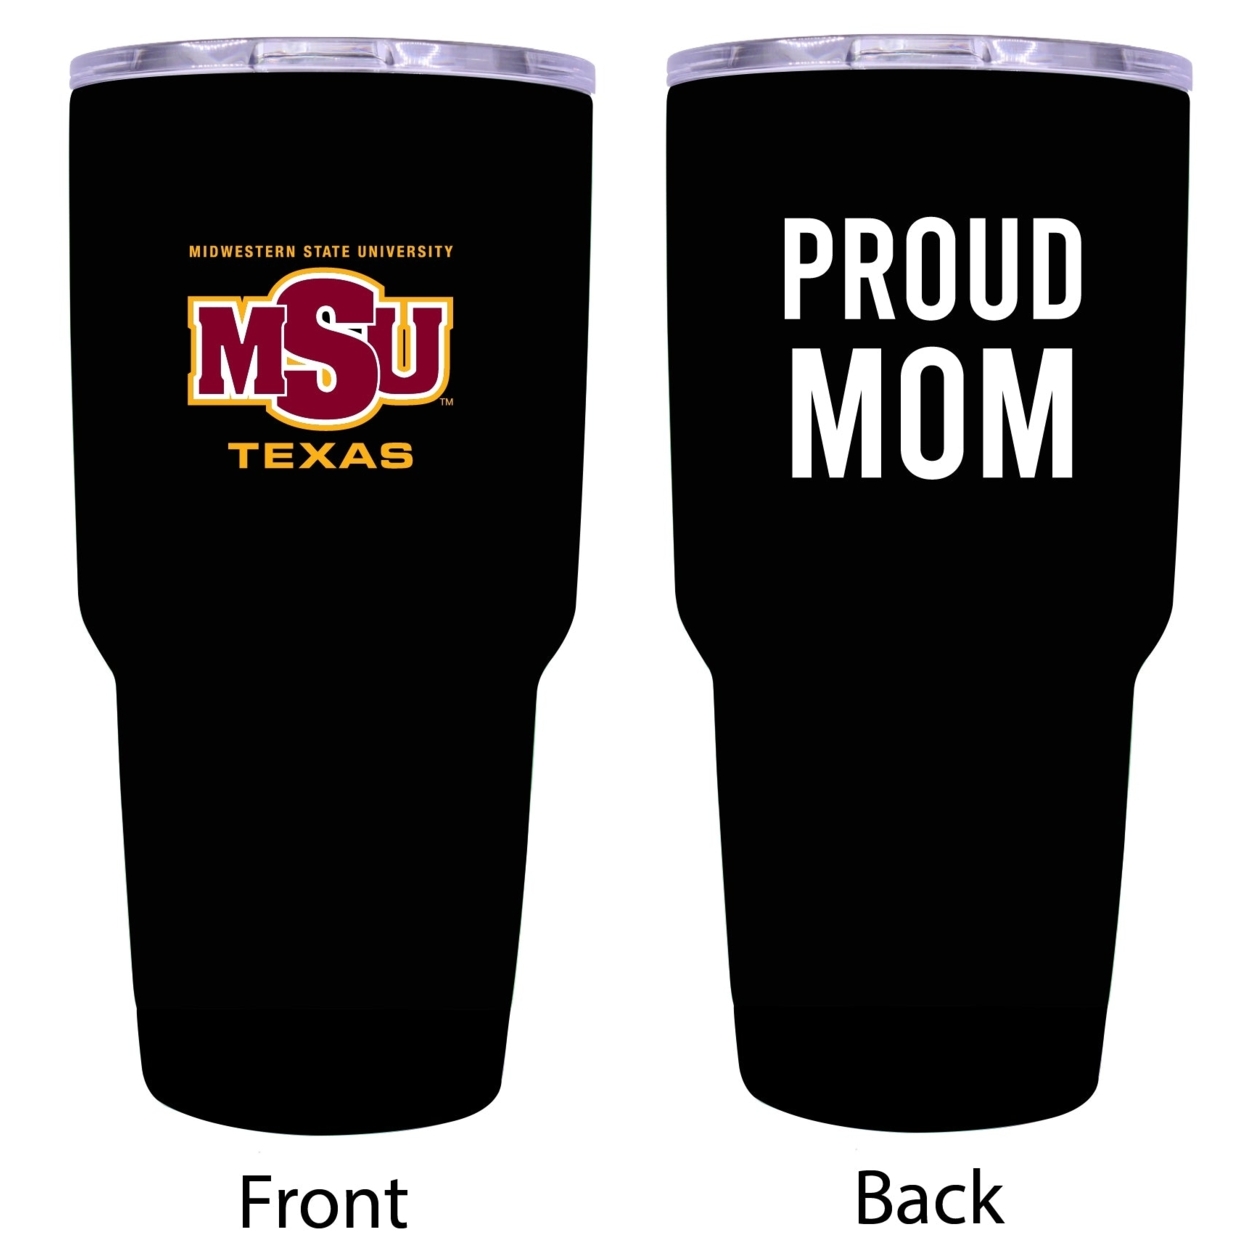 Midwestern State University Proud Mom 24 Oz Insulated Stainless Steel Tumbler